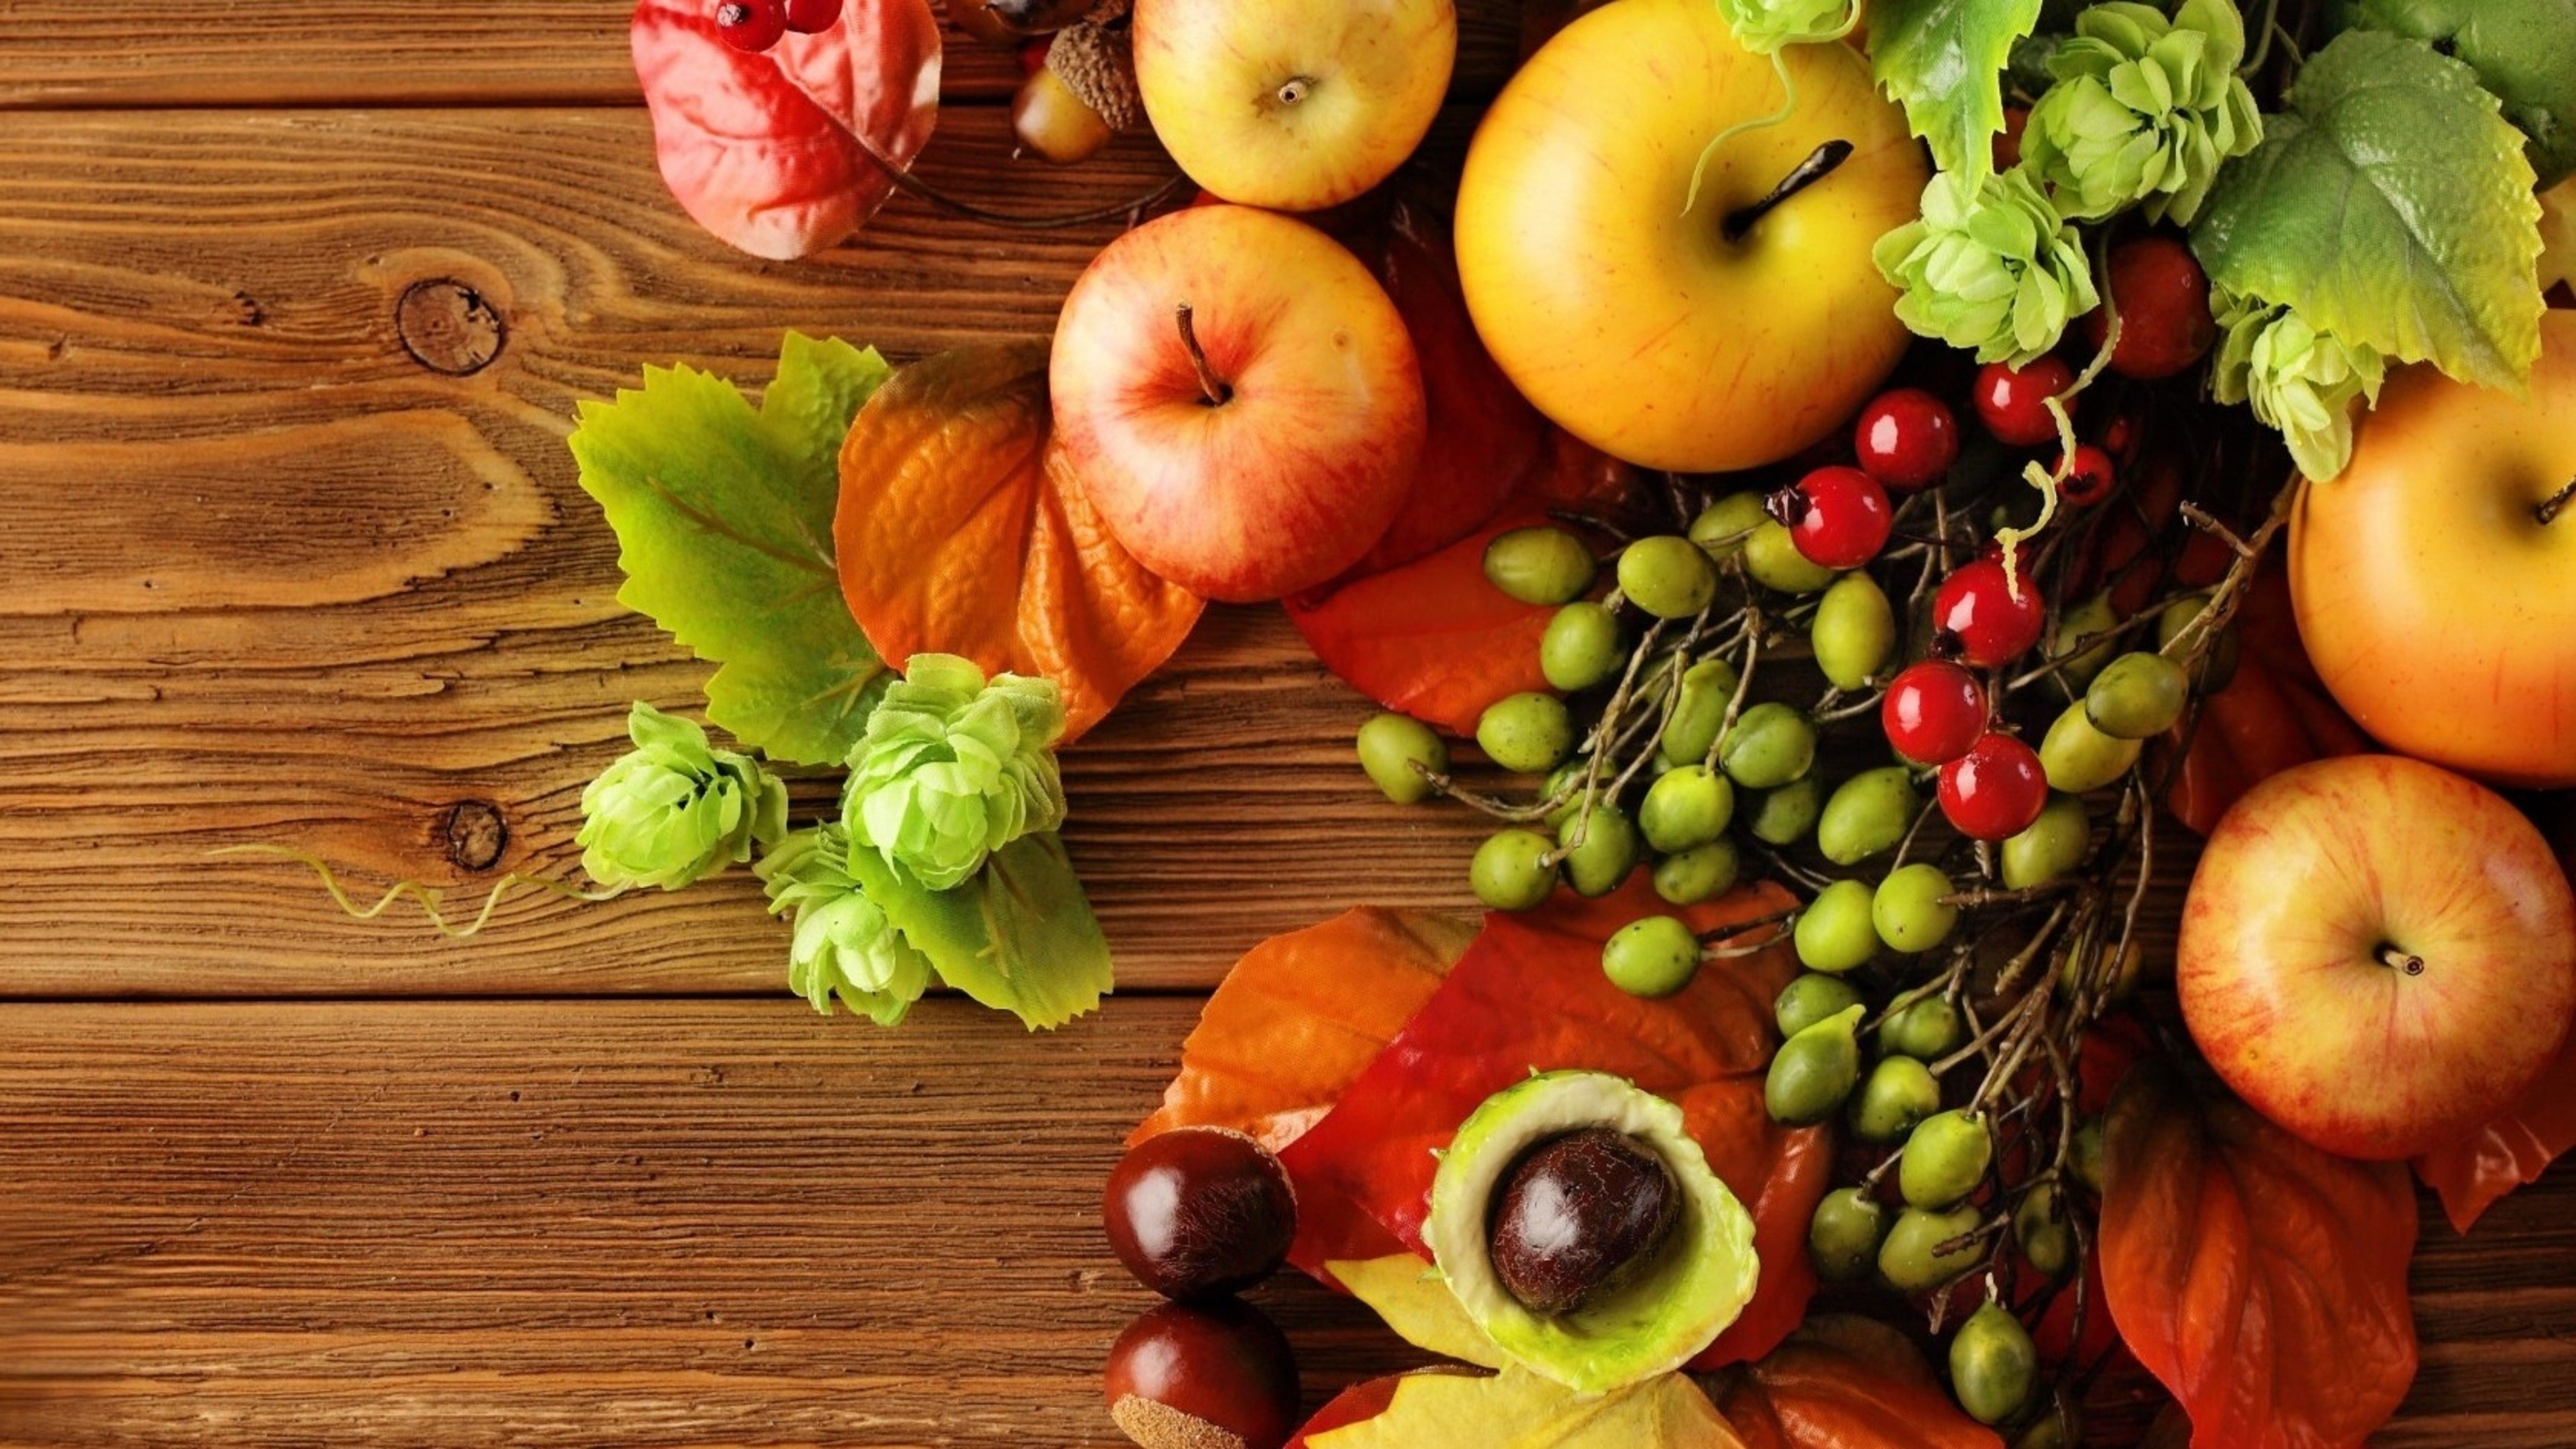 many-autumn-products-fruits-wallpaper-5120x2880.jpg